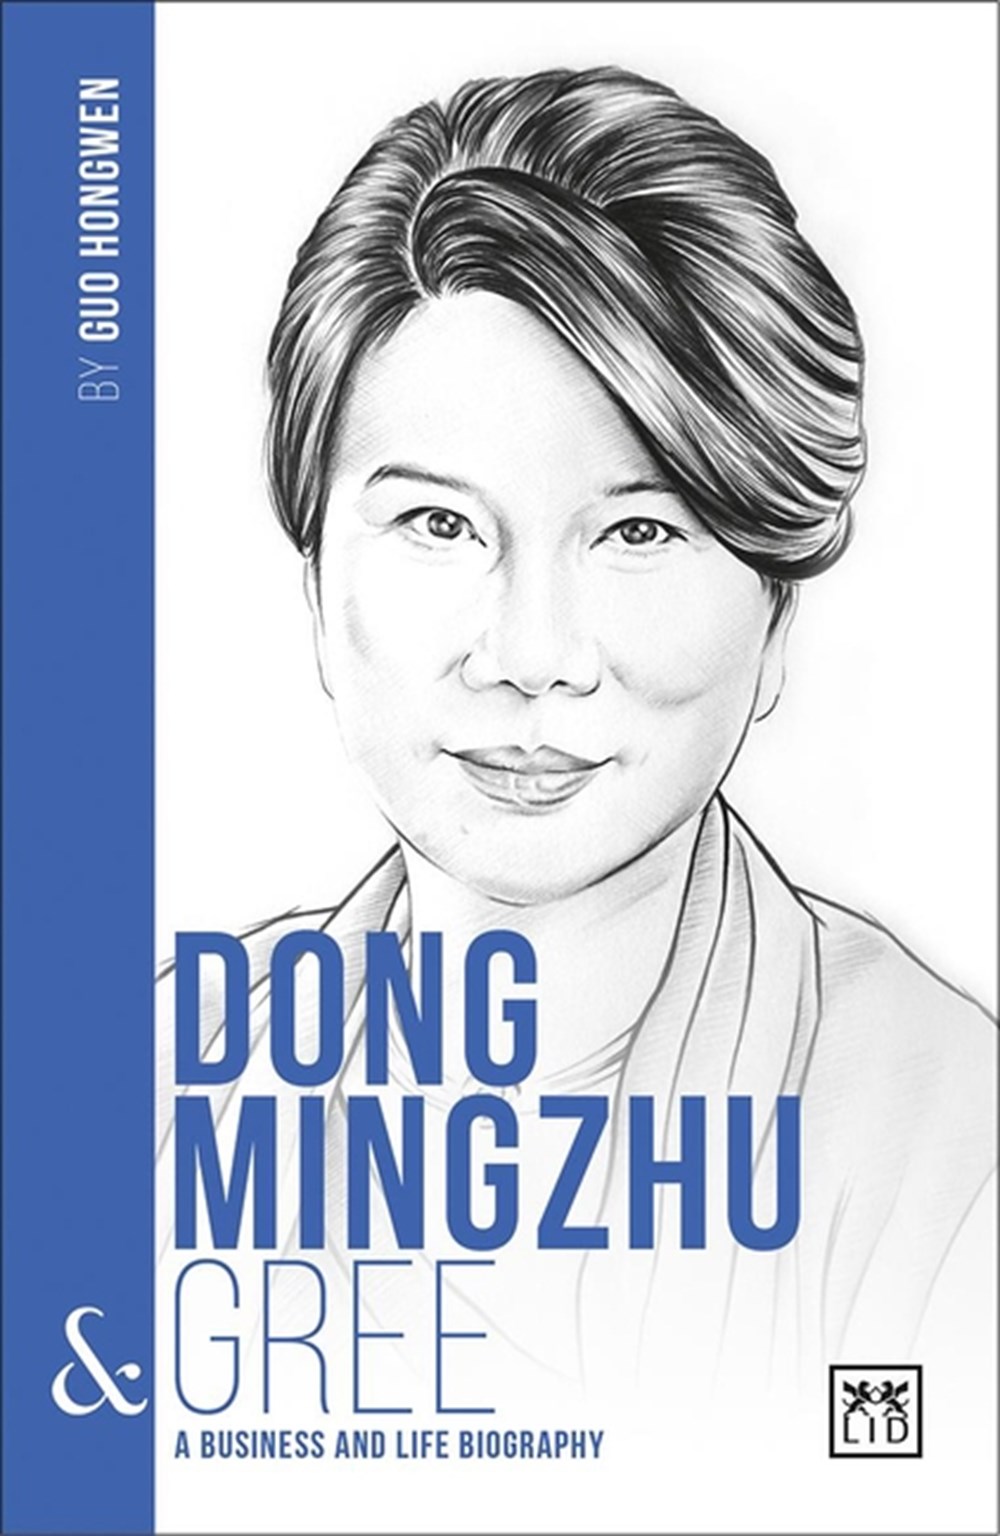 Dong Mingzhu & Gree A Business and Life Biography